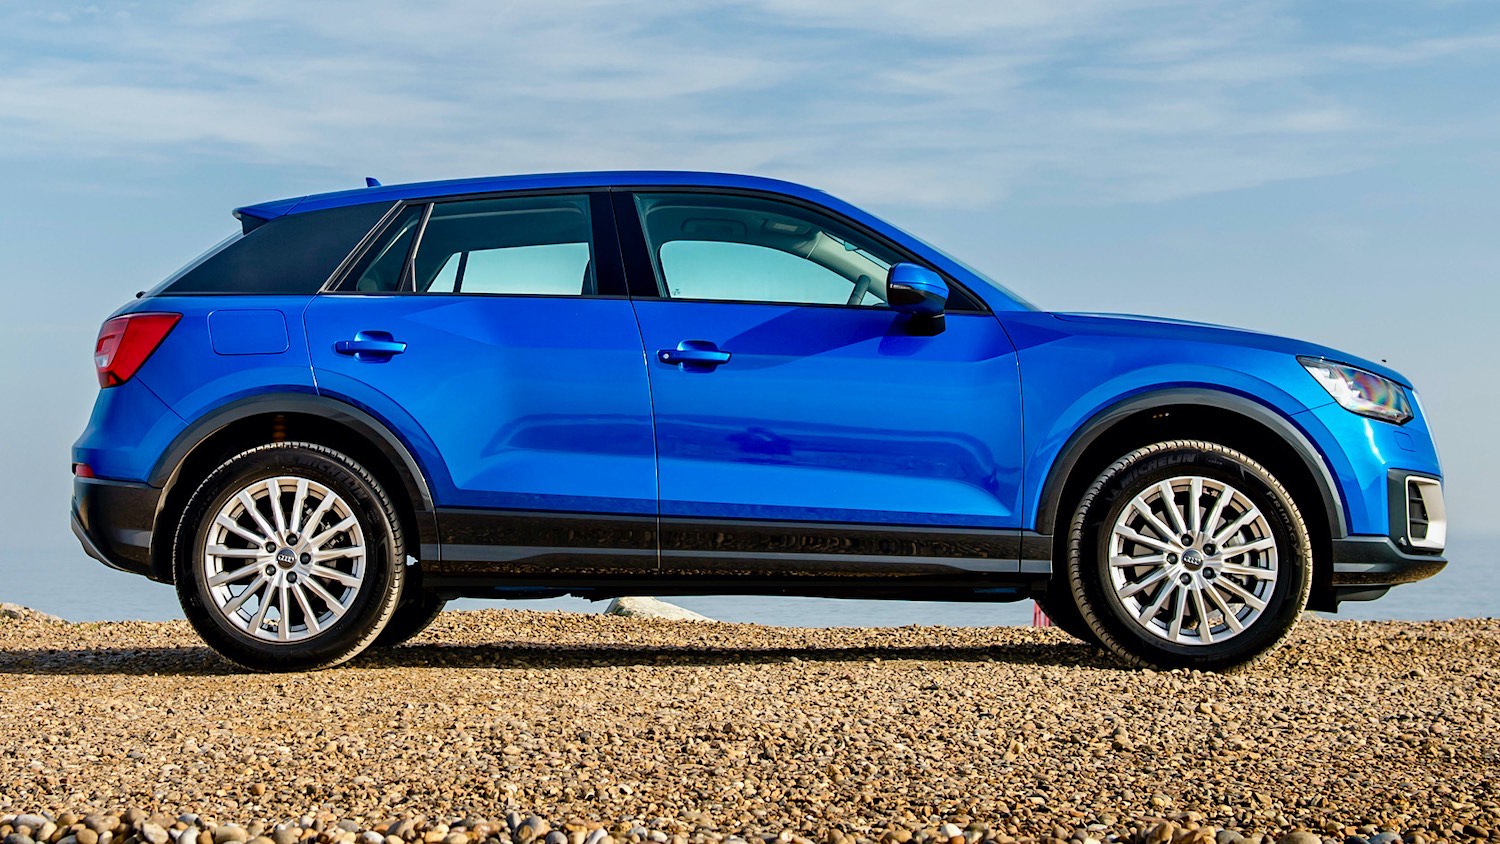 The Audi Q2, an SUV cut above the rest